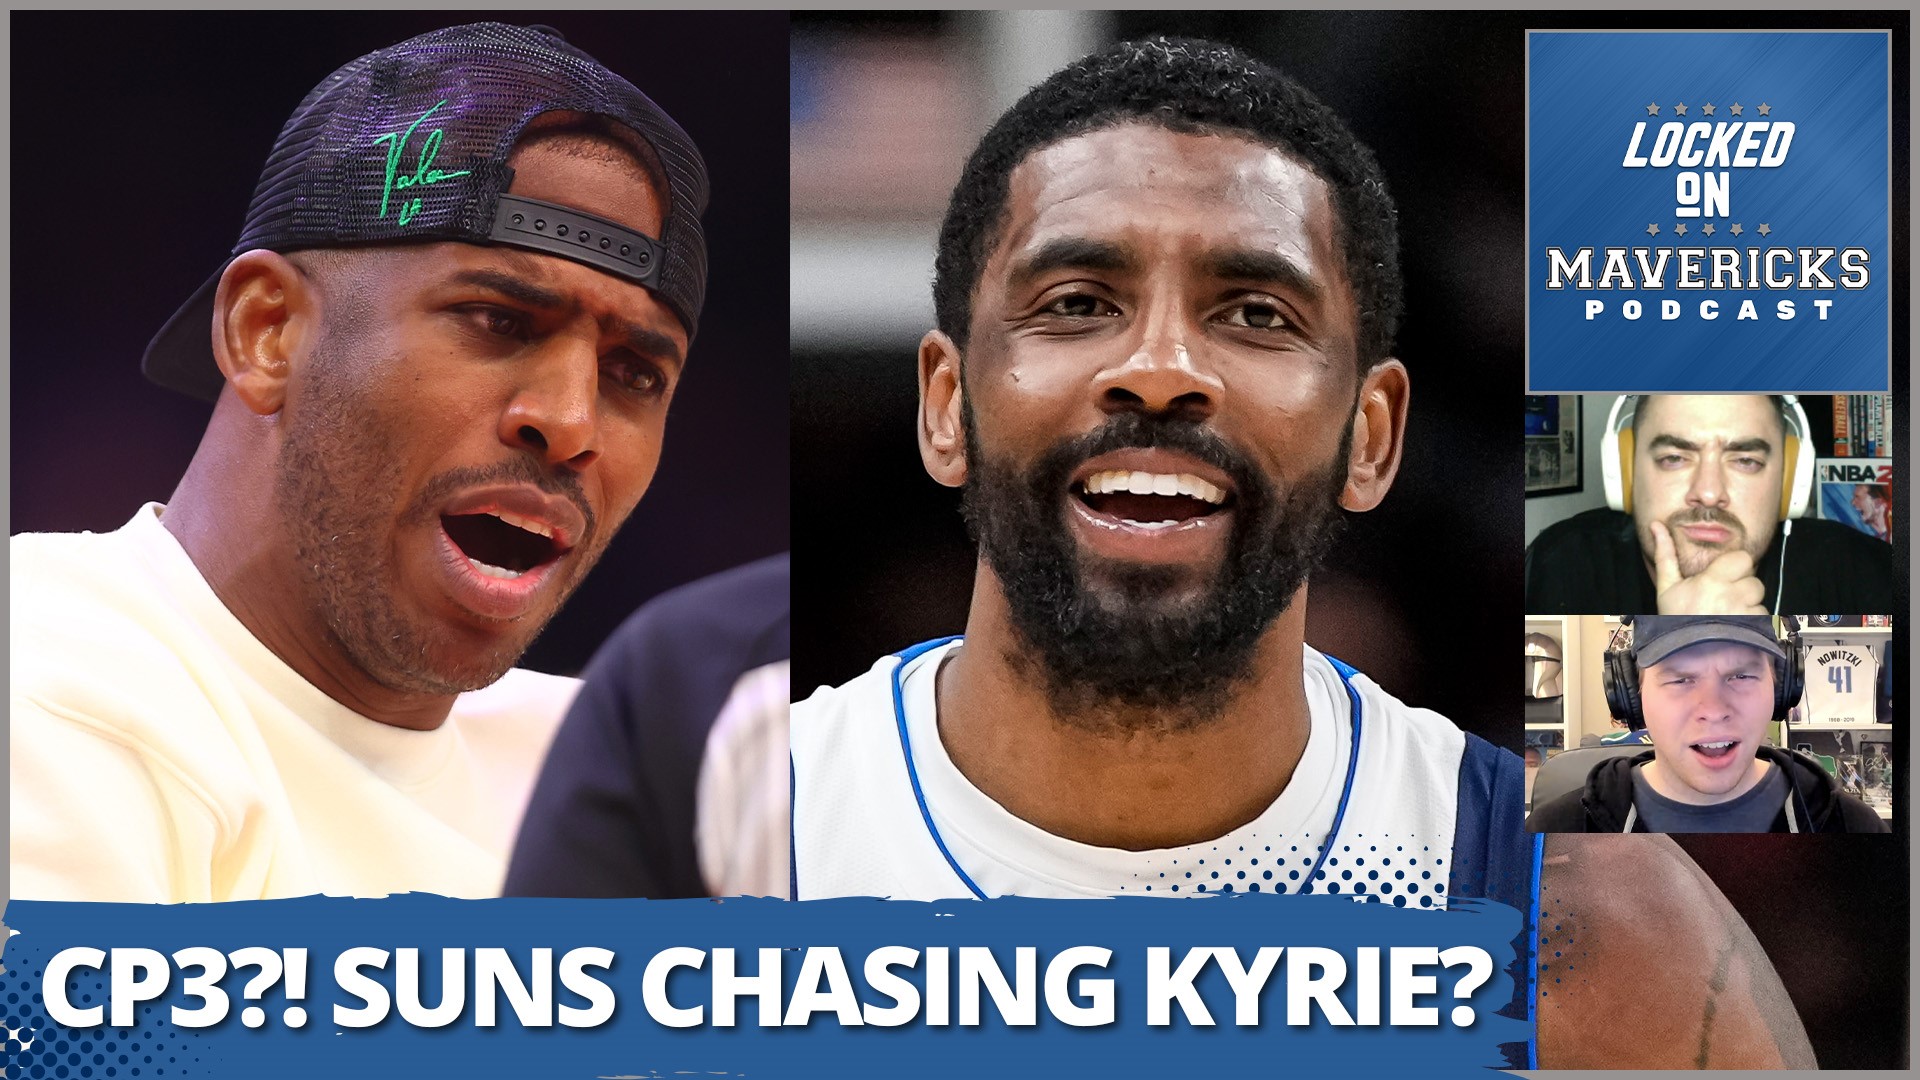 Nick Angstadt & Isaac Harris discuss the report that the Phoenix Suns are waiving Chris Paul and what that means for the Dallas Mavericks and Kyrie Irving's future.